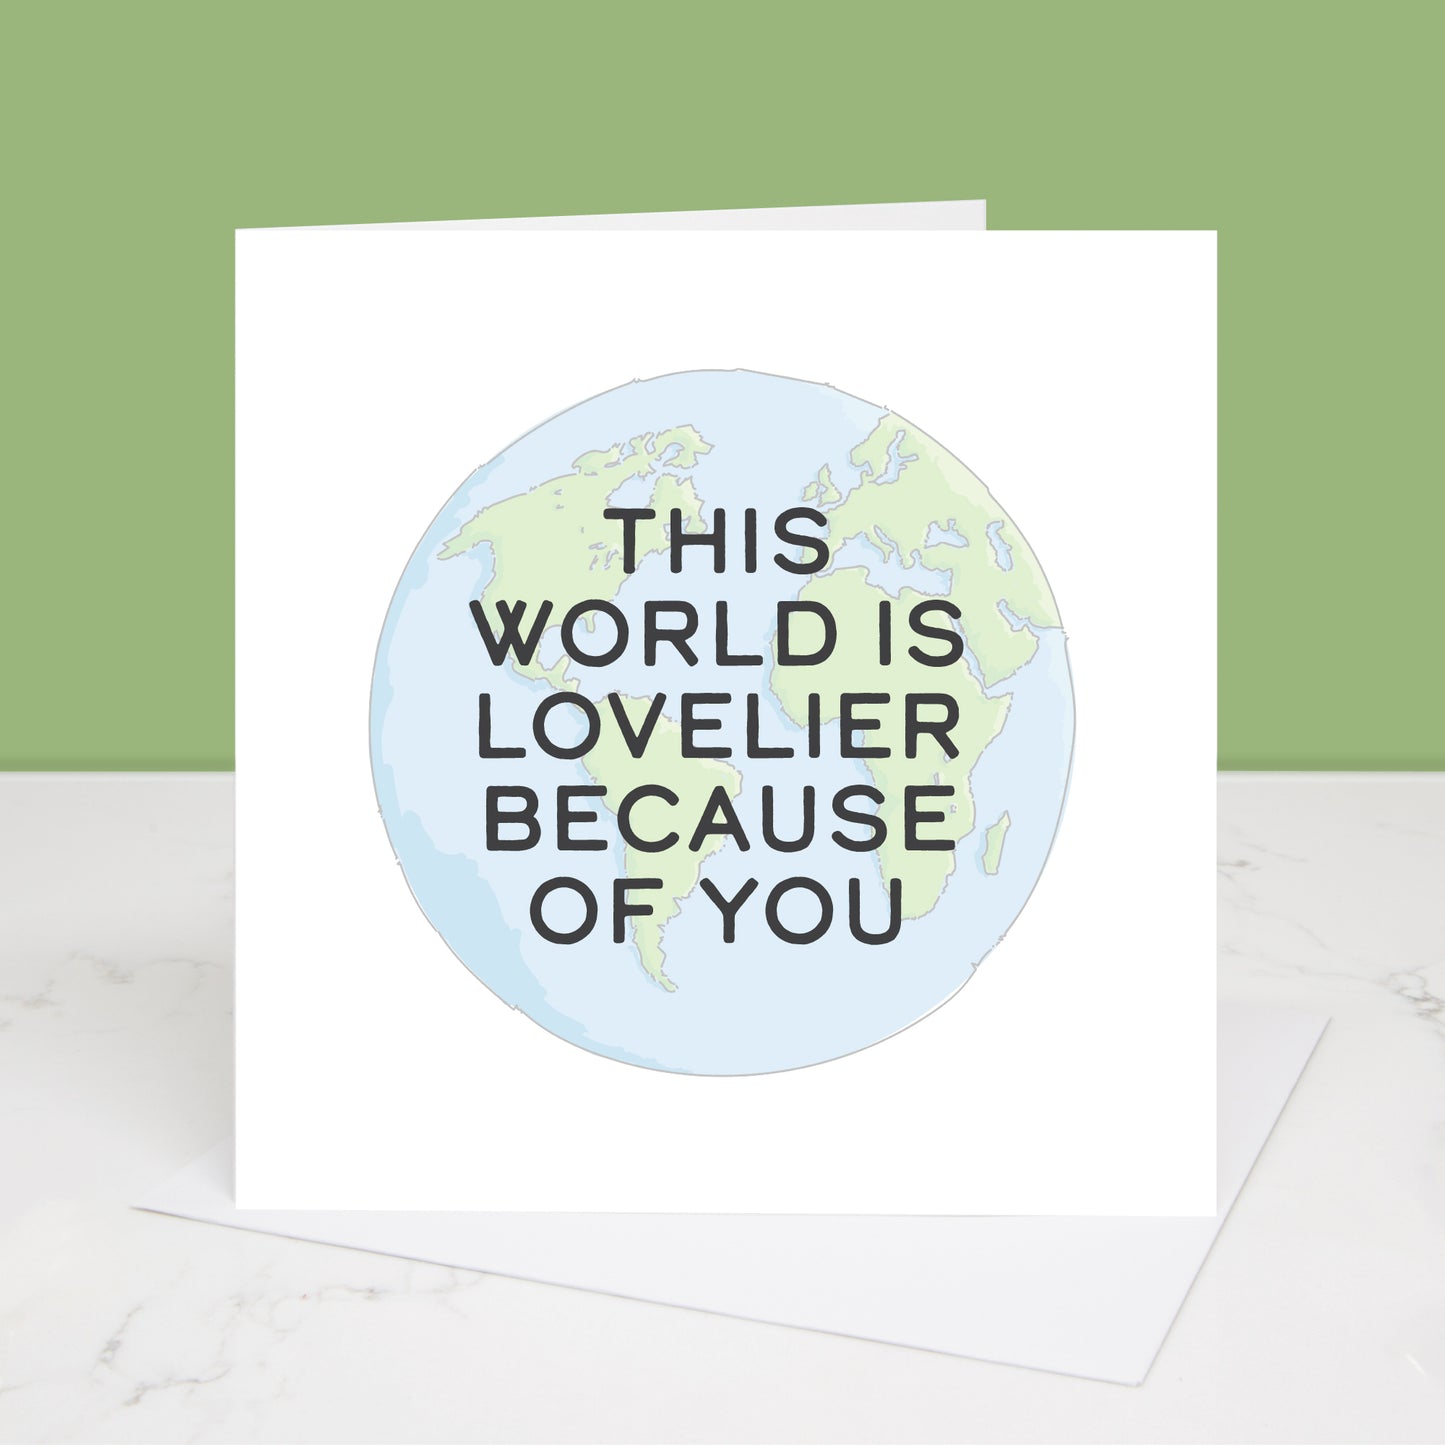 The World is Lovelier Because of You Greetings Card